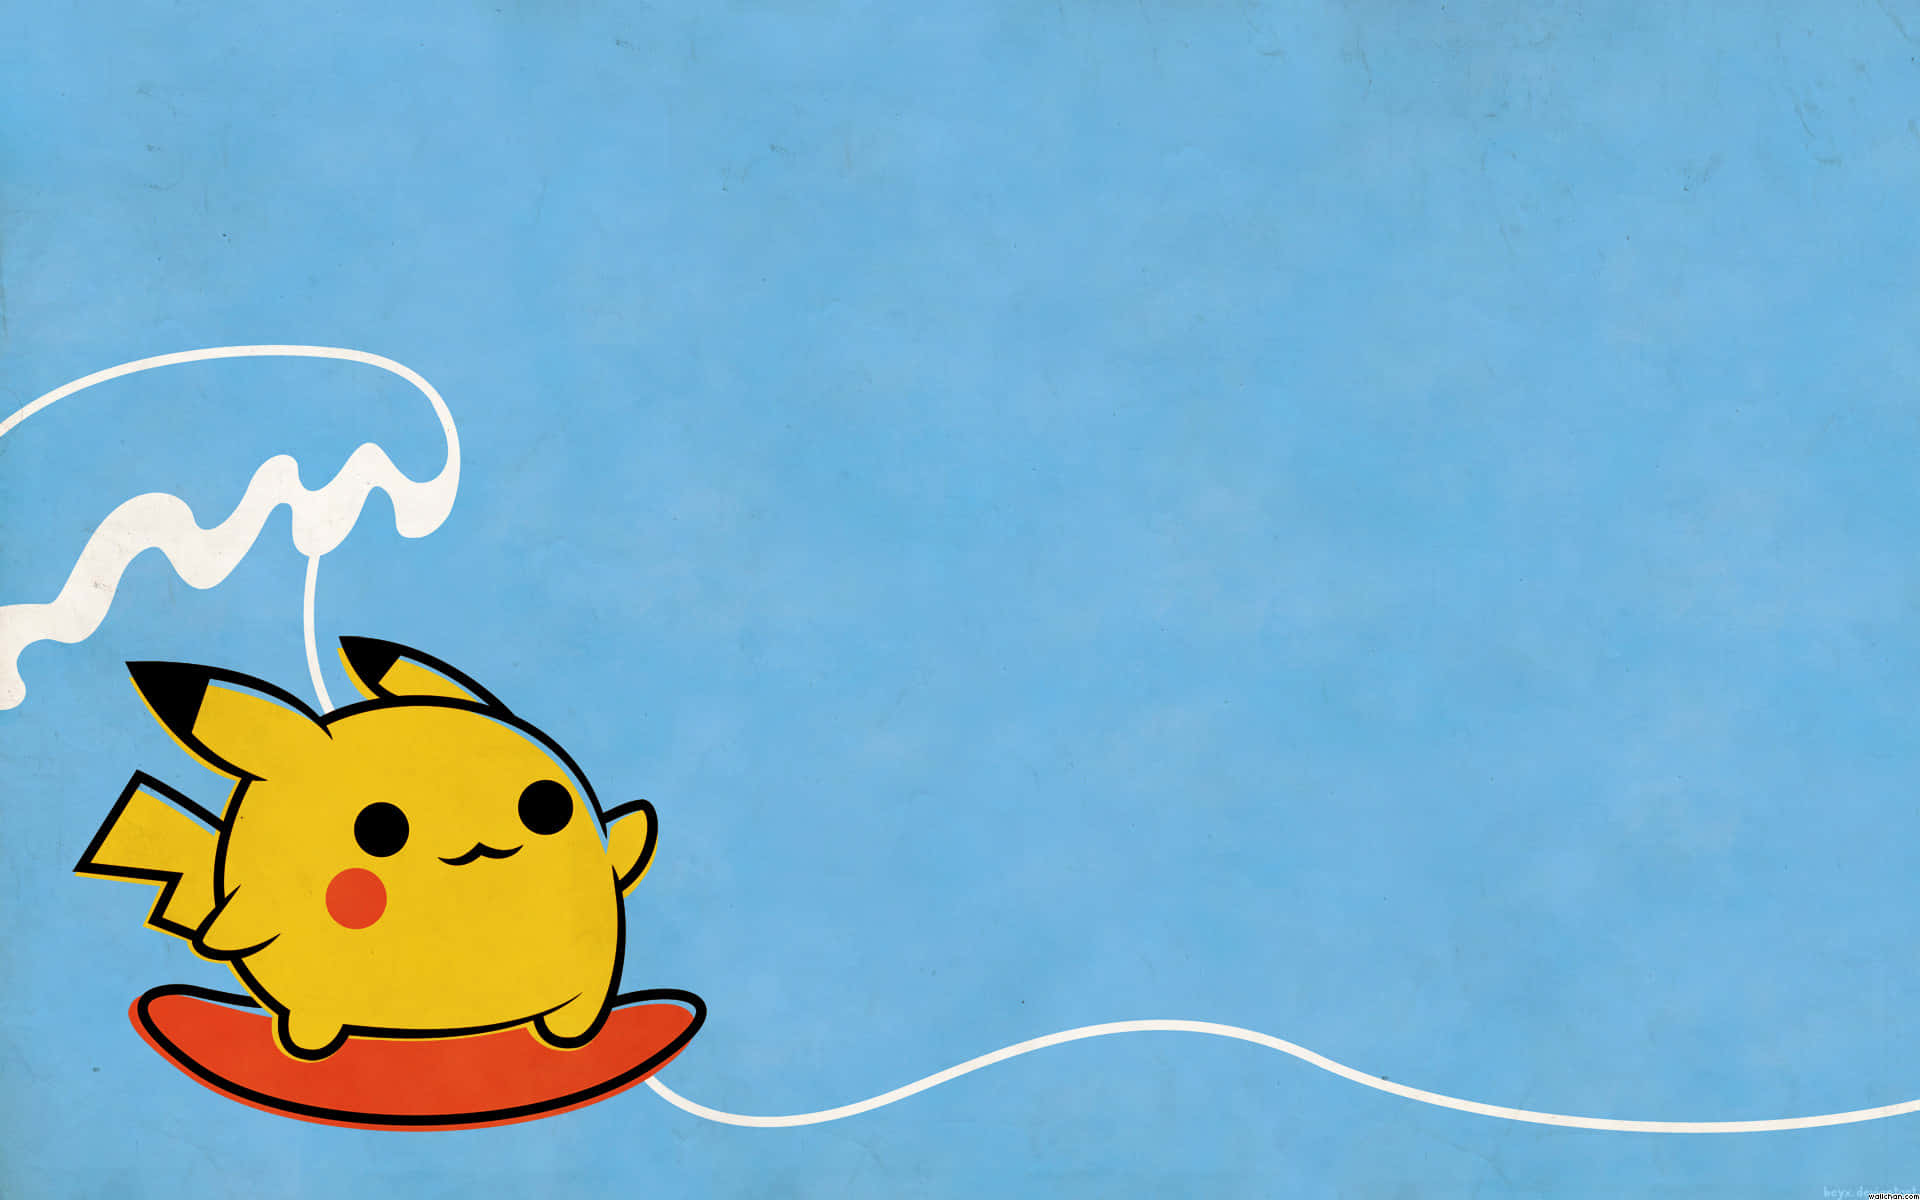 Cute Pikachu on the hunt for adventure!